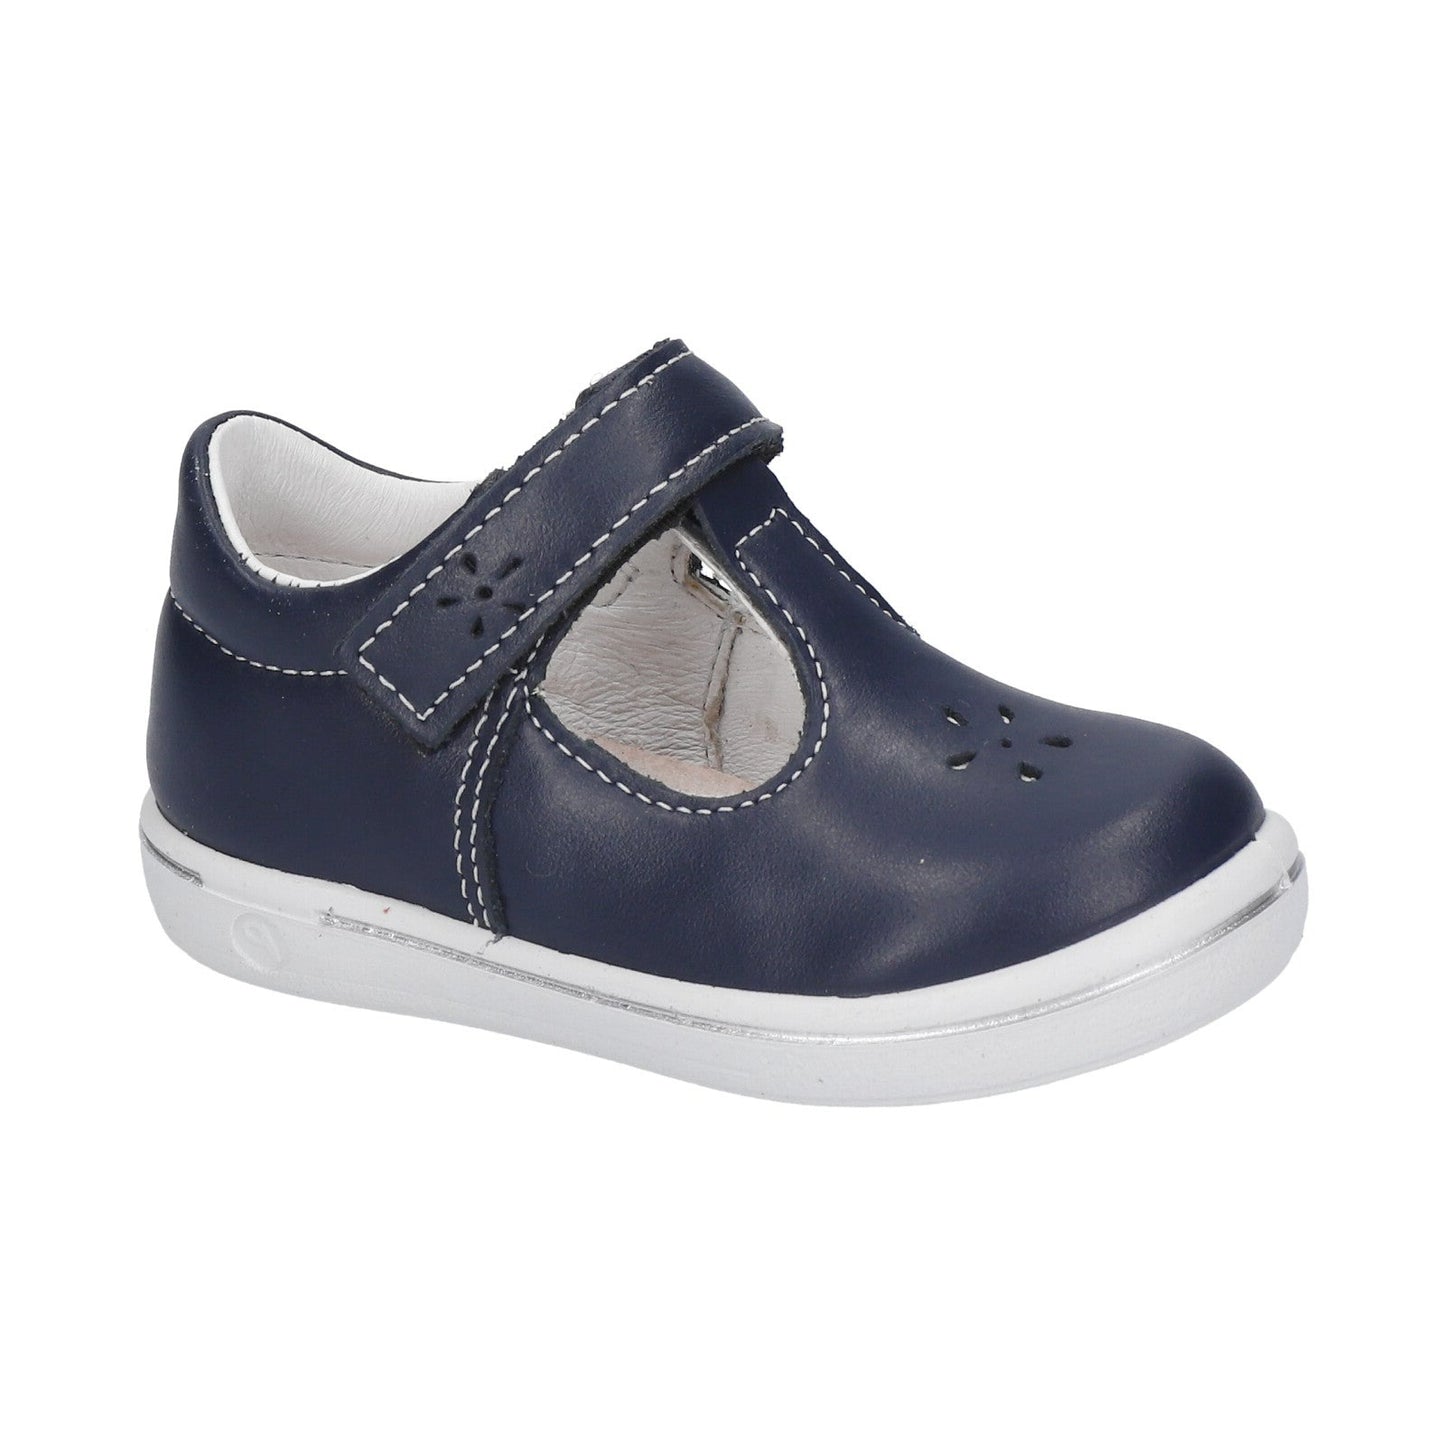 Winona Girl's T-Bar Shoe in Navy leather